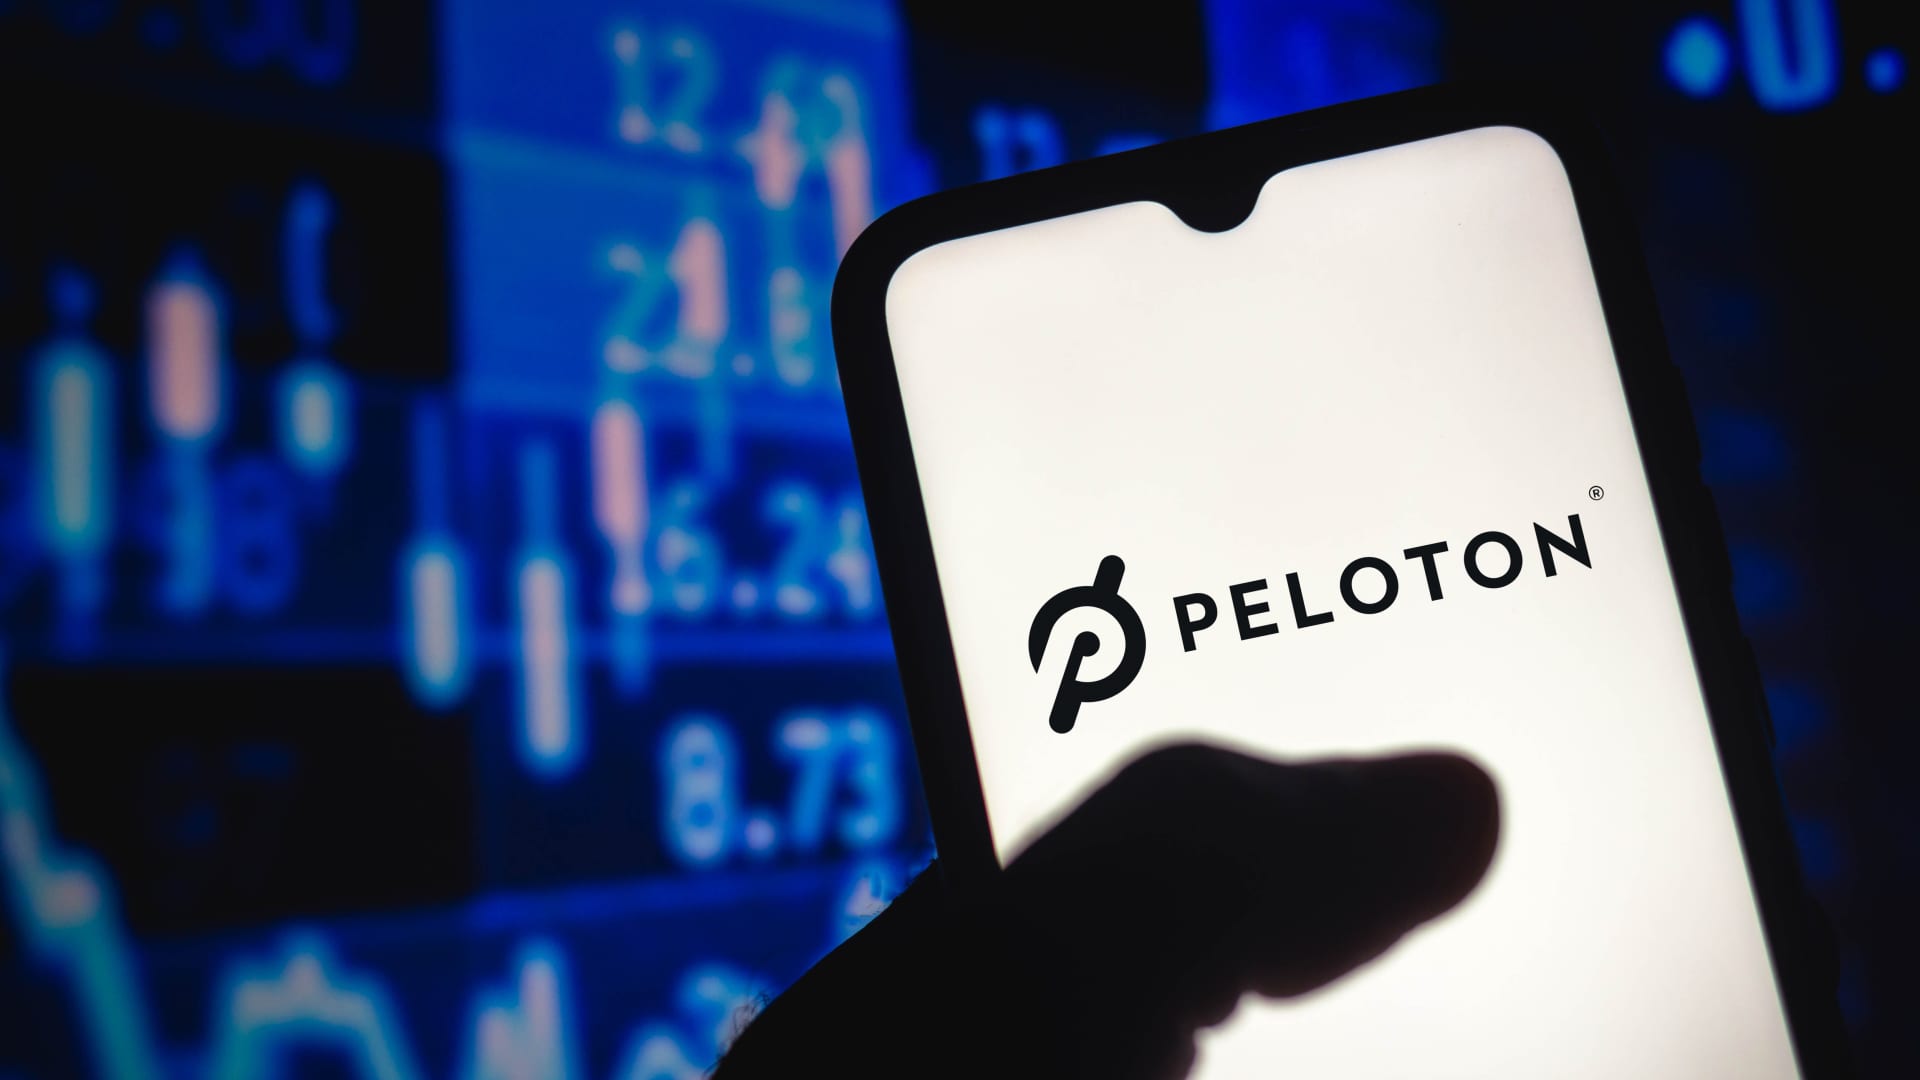 Peloton sweetens employee pay incentives as it fights to boost morale and stage a turnaround